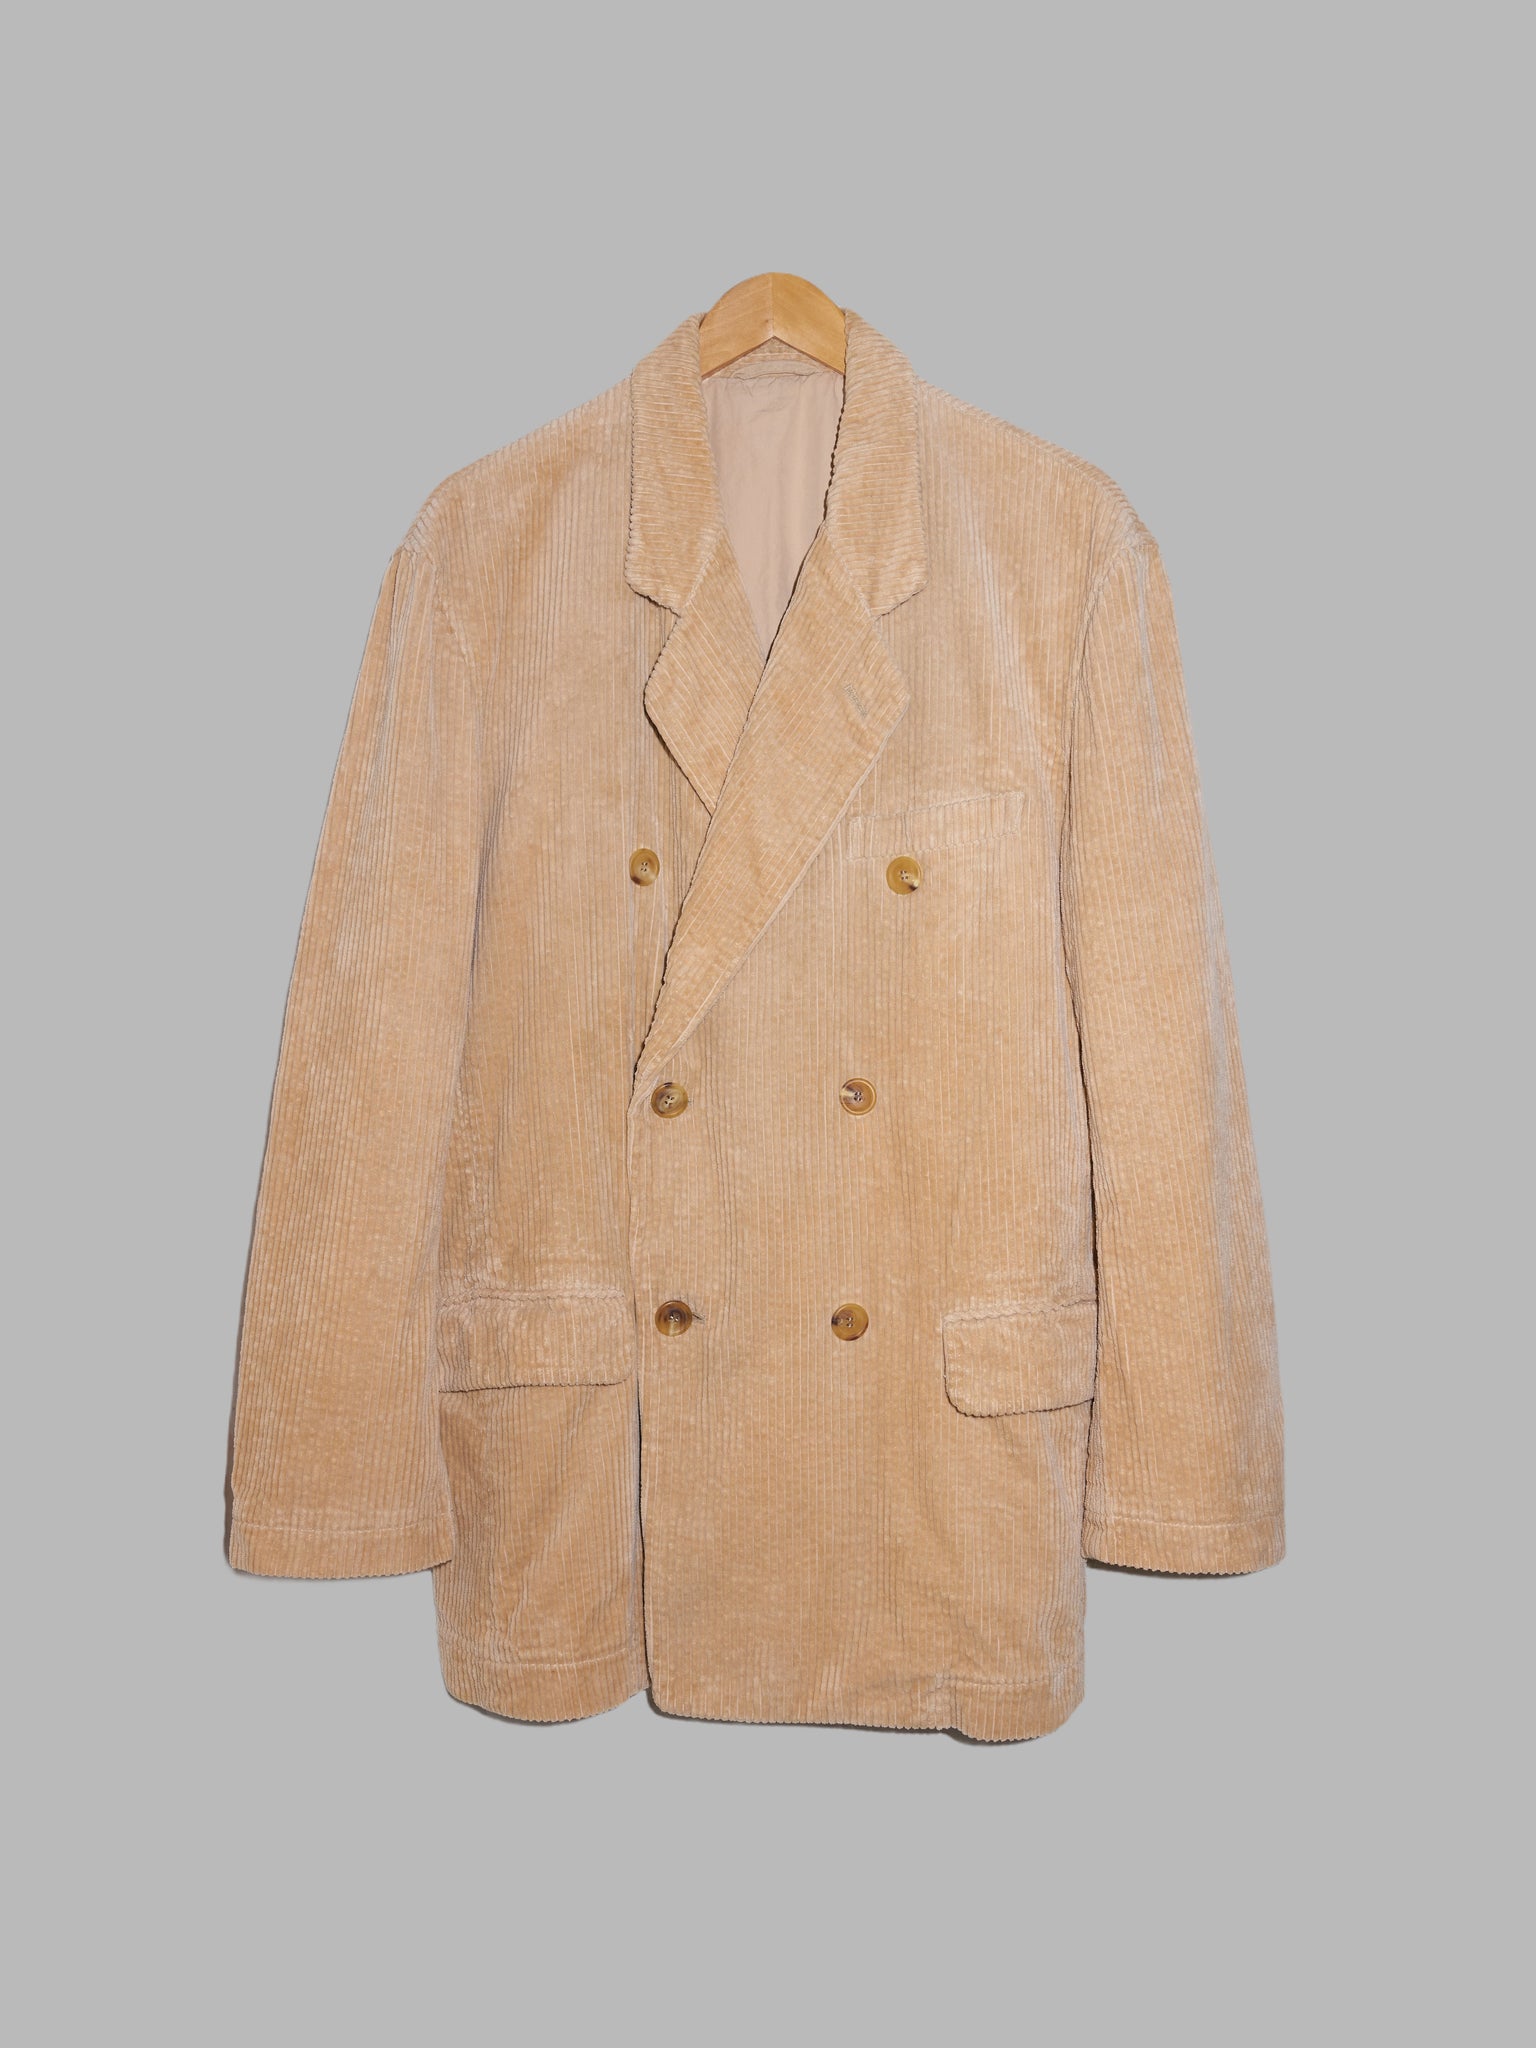 Issey Miyake beige cotton corduroy double breasted blazer and trouser suit - M